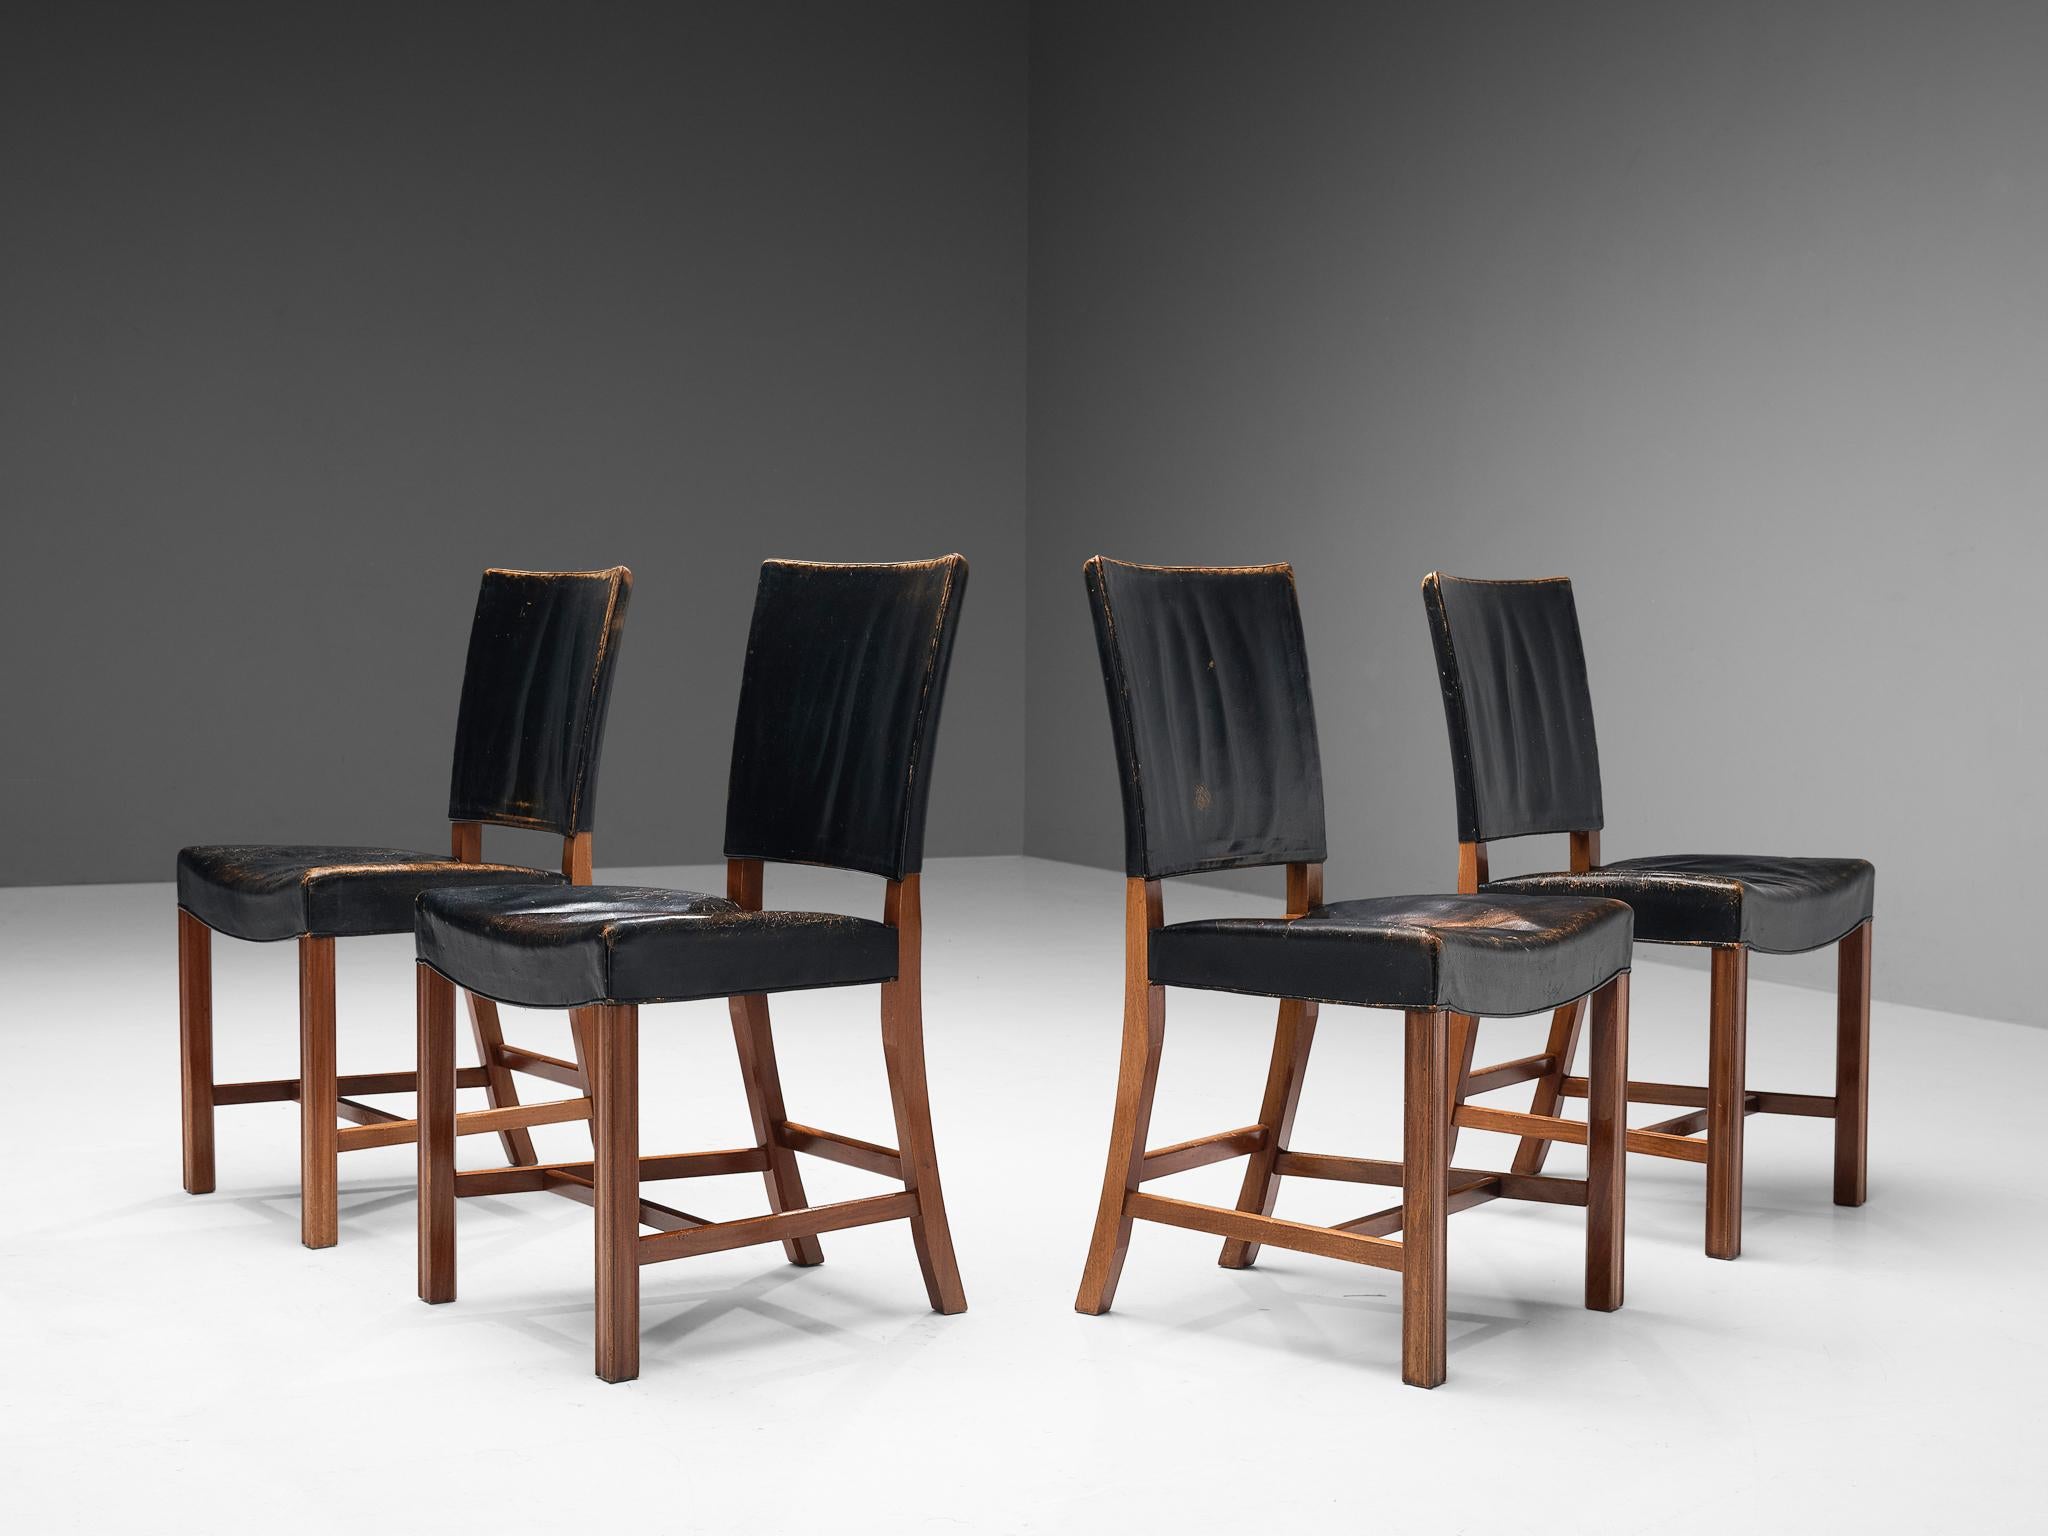 Kaare Klint for Rud Rasmussen, set of four dining chairs 'The Red Chair', model 3949, original patinated leather, mahogany, Denmark, designed 1928, manufactured 1930s.

These dining chairs in black leather and mahogany, were designed in 1928 and